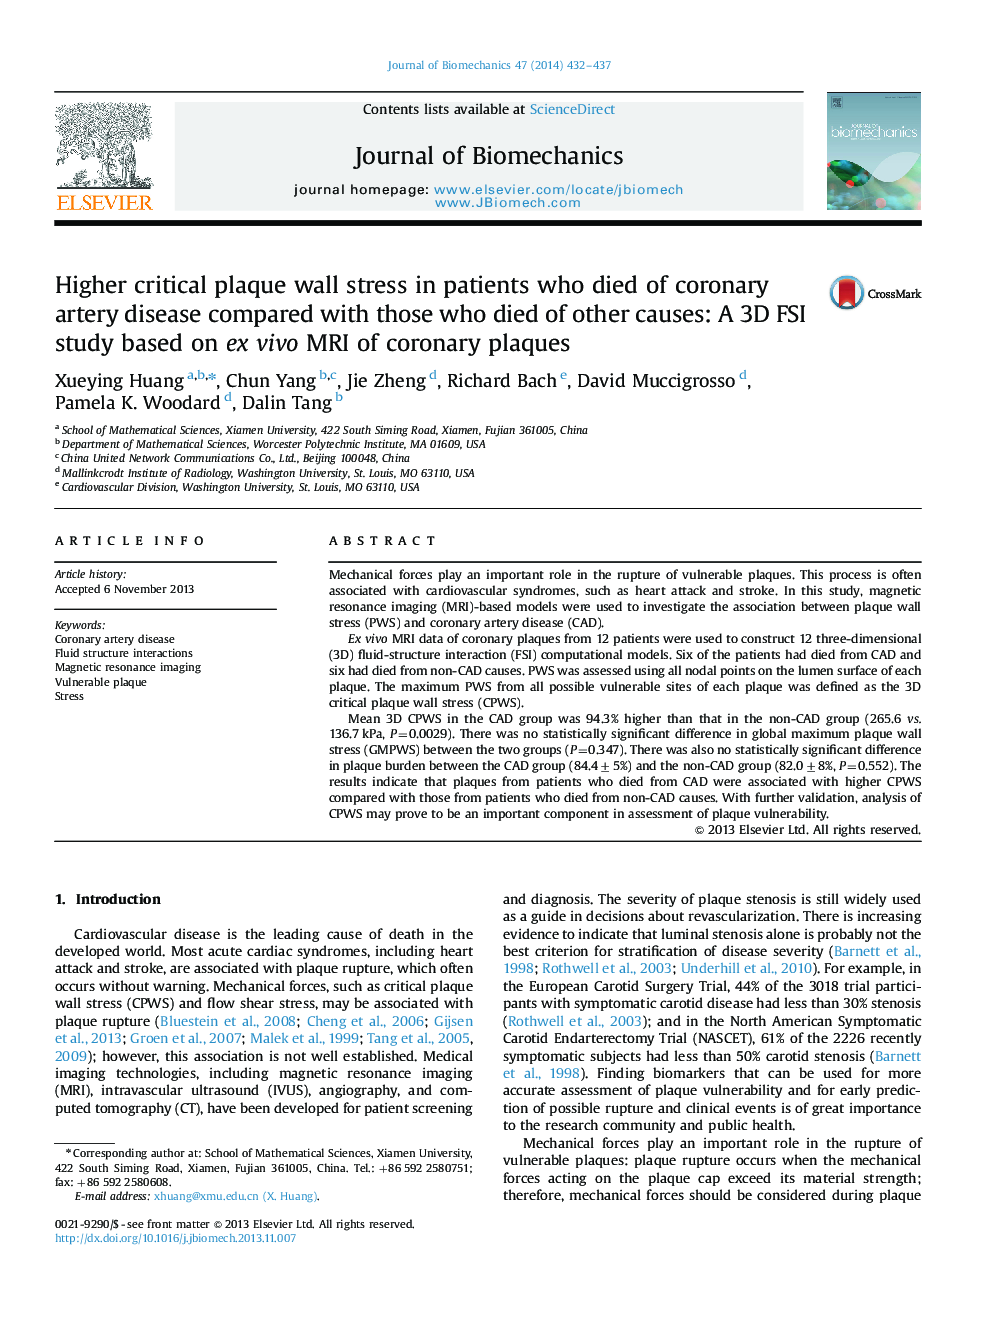 Higher critical plaque wall stress in patients who died of coronary artery disease compared with those who died of other causes: A 3D FSI study based on ex vivo MRI of coronary plaques